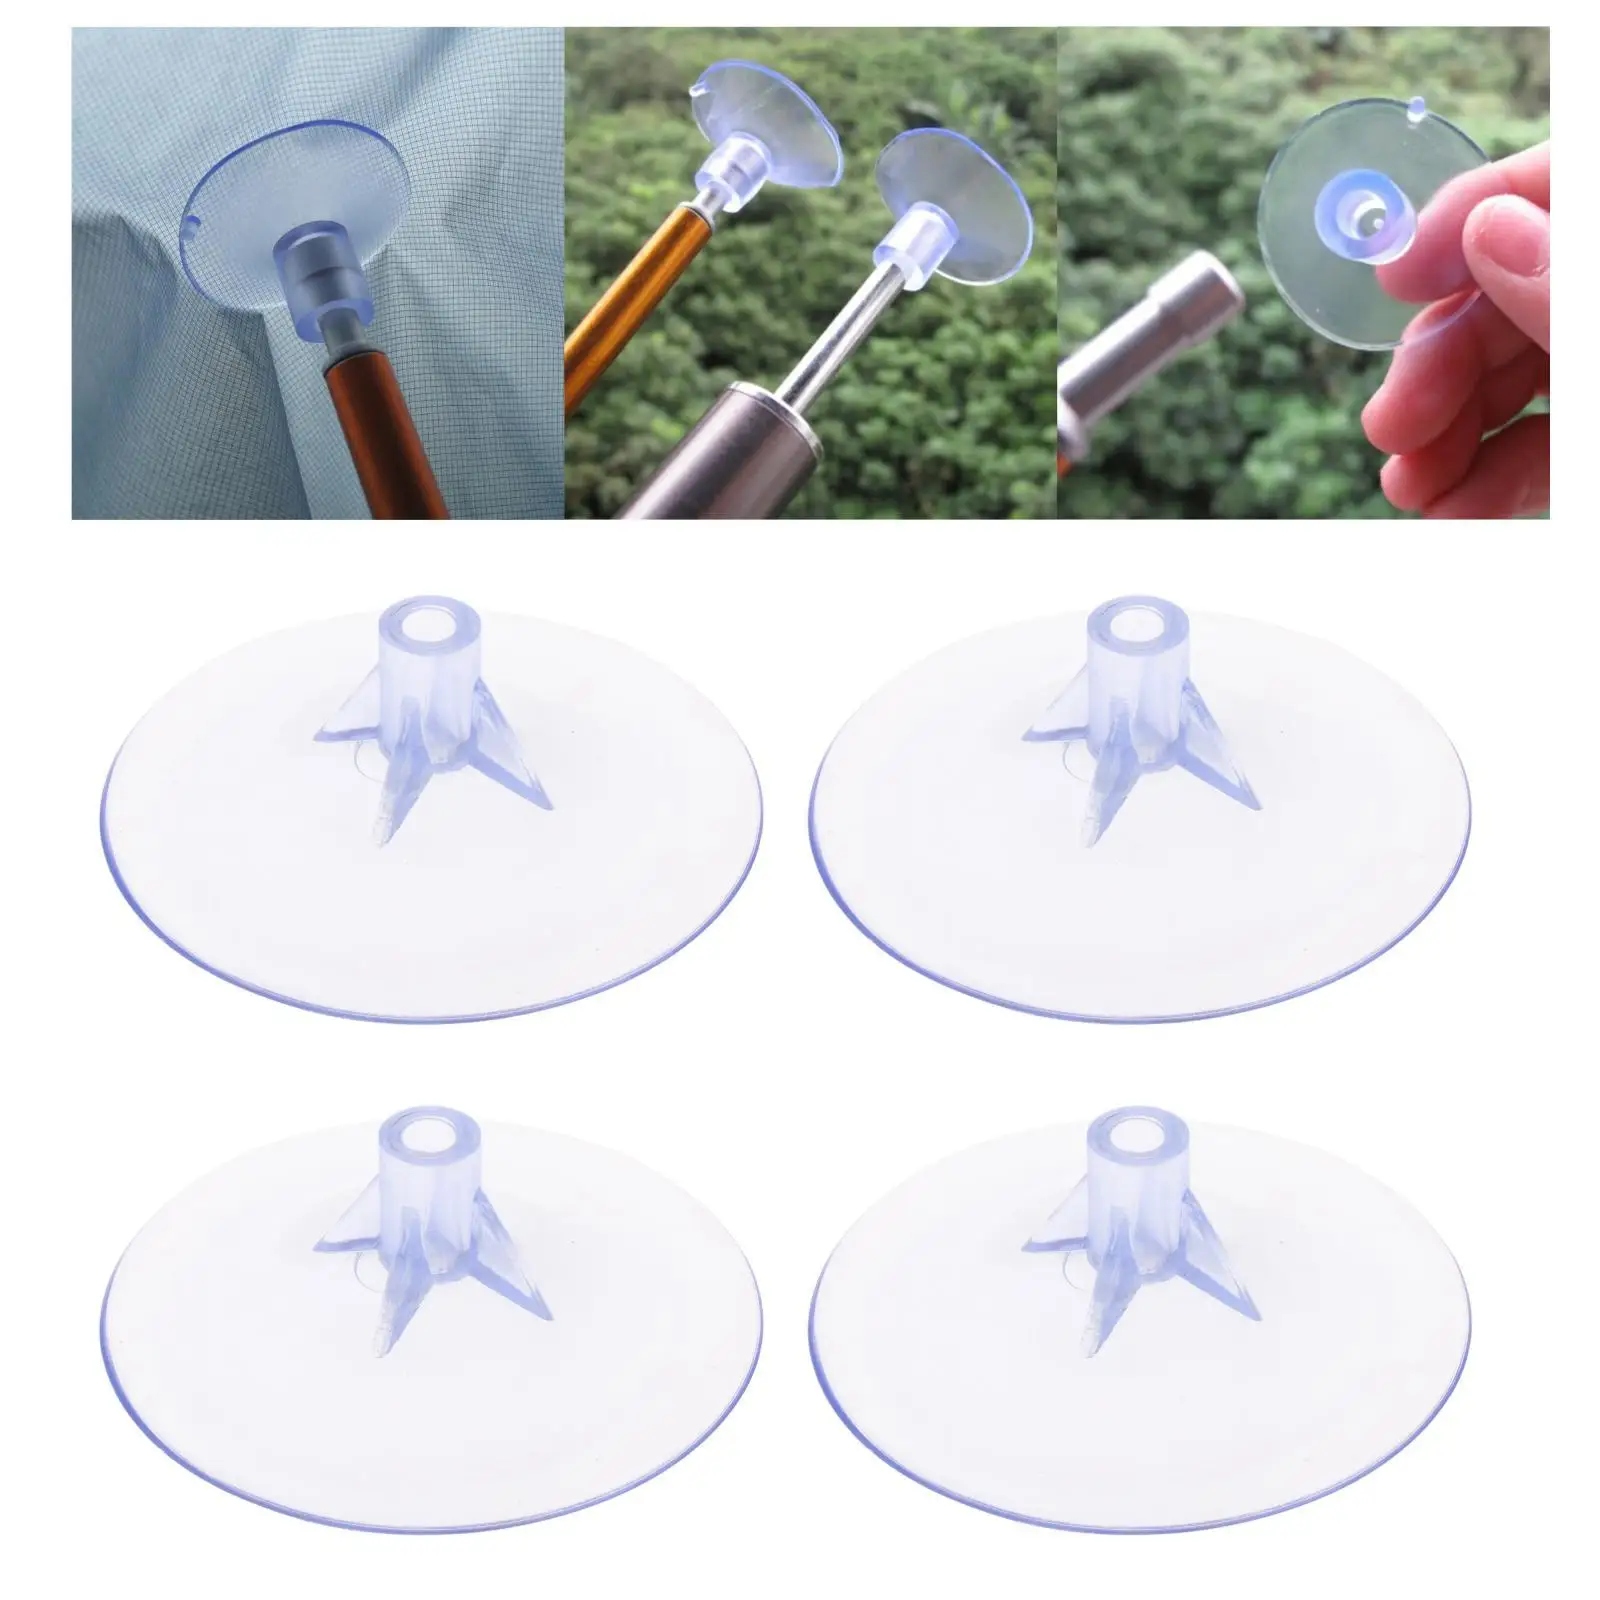 4Pcs Tent Pole Cover Protection Helmet Tent Support Replacement Tips Top Caps Anti-Slip PE for Canopy Pole Trekking Pole Awning